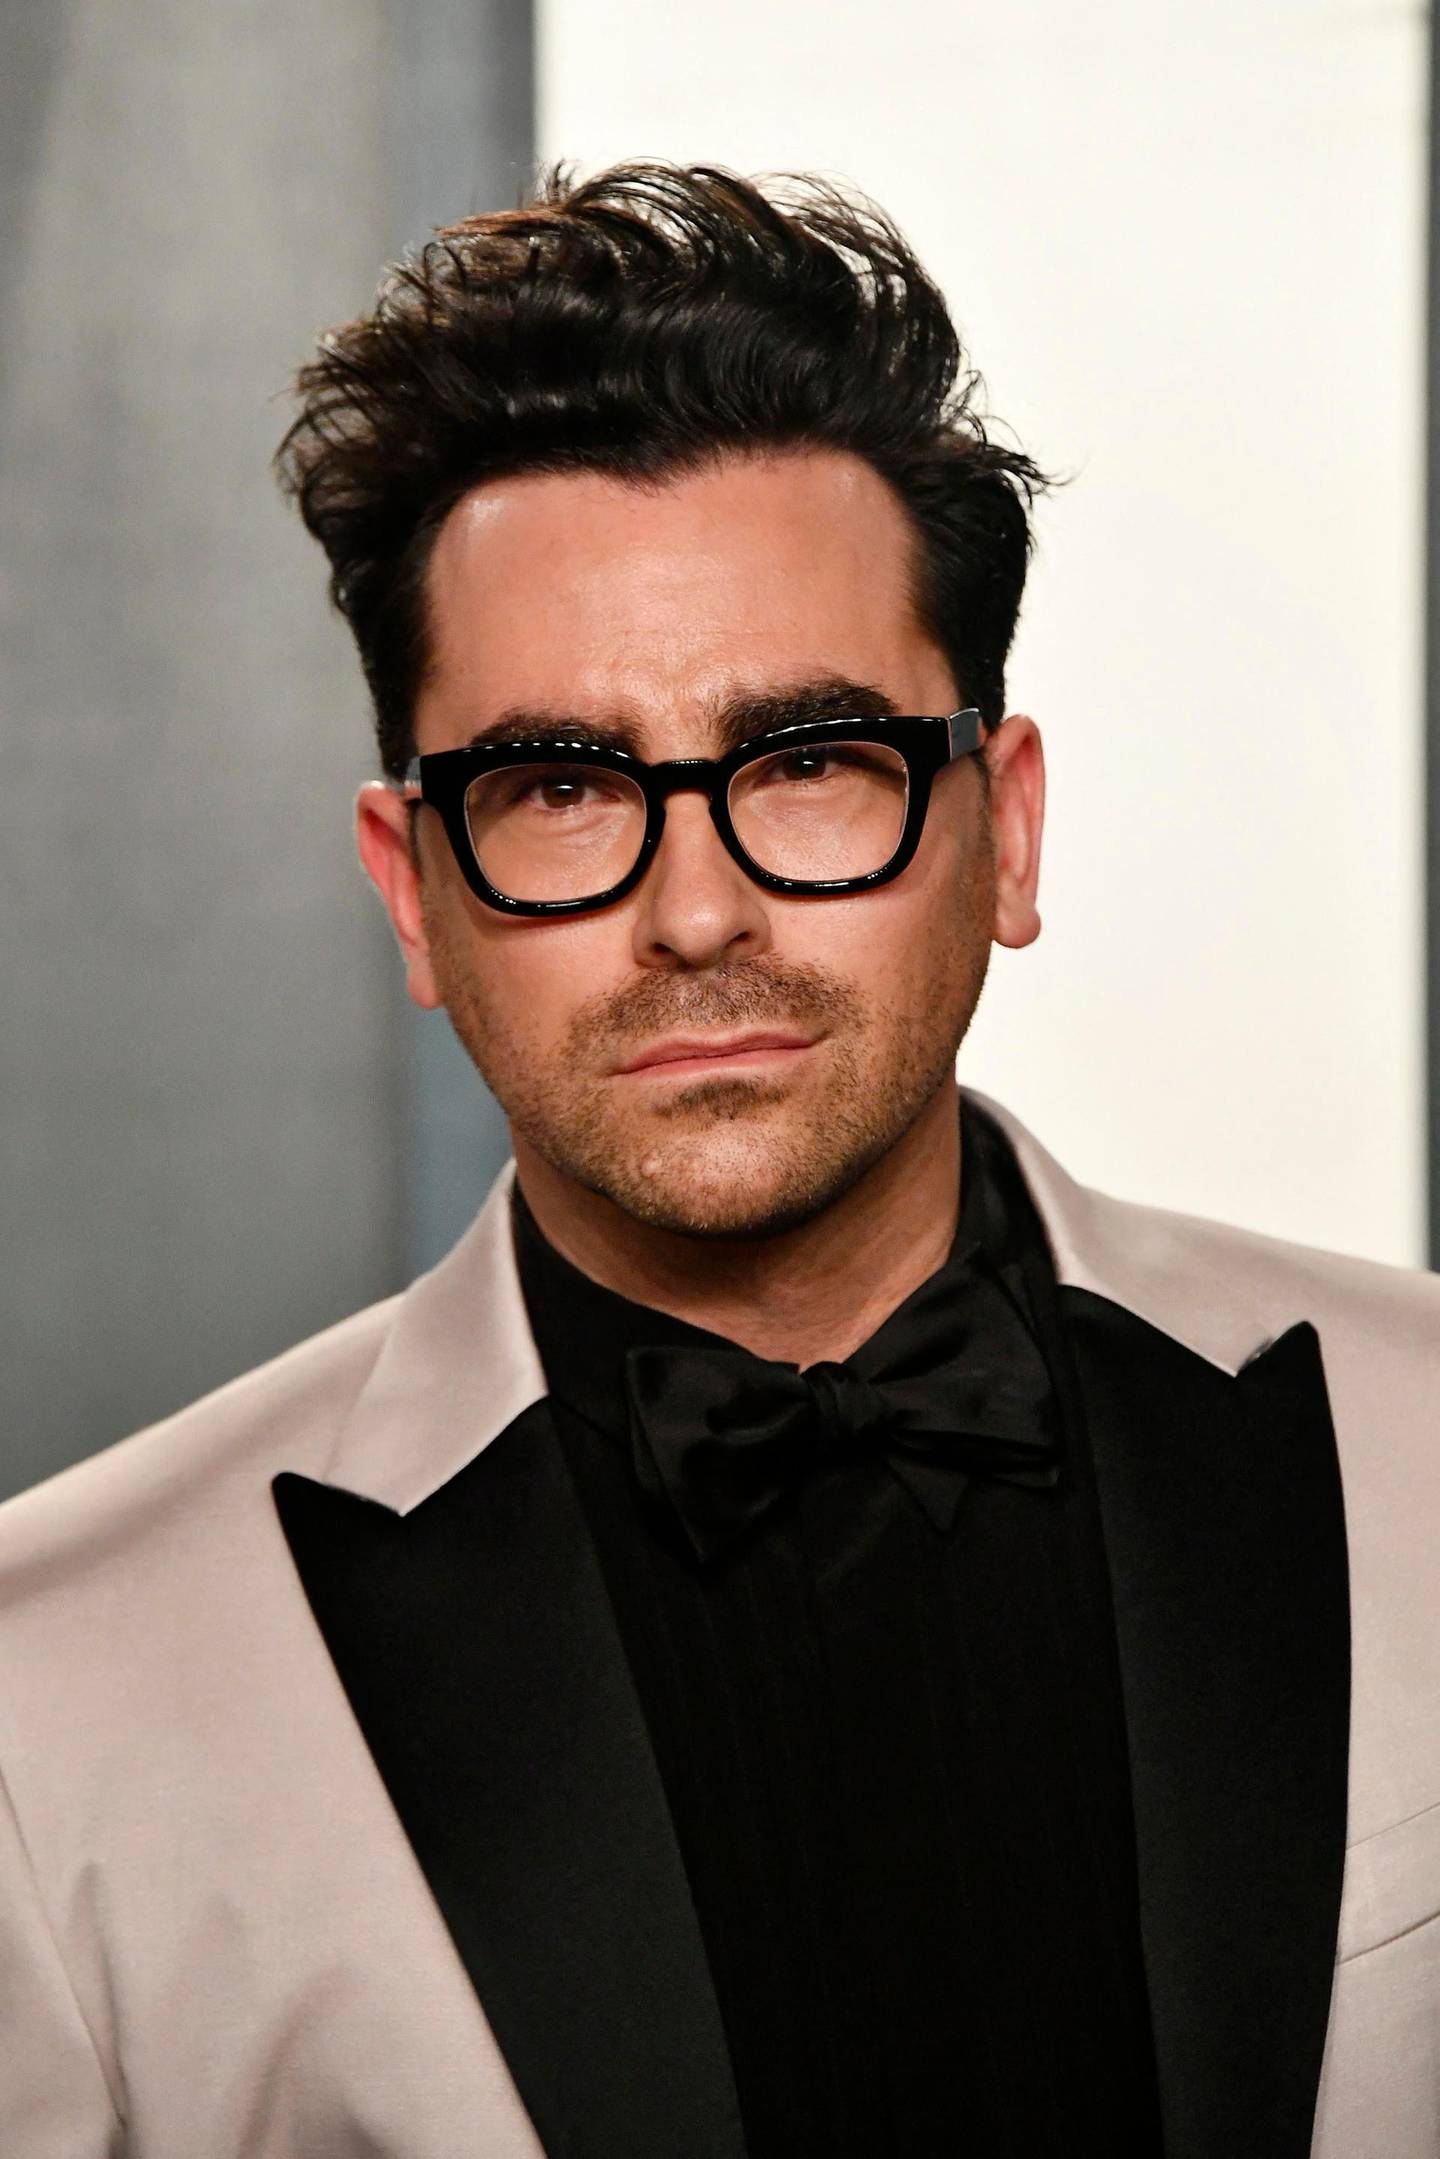 BEVERLY HILLS, CALIFORNIA - FEBRUARY 09: Dan Levy attends the 2020 Vanity Fair Oscar Party hosted by Radhika Jones at Wallis Annenberg Center for the Performing Arts on February 09, 2020 in Beverly Hills, California.   Frazer Harrison/Getty Images/AFP (Photo by Frazer Harrison / GETTY IMAGES NORTH AMERICA / AFP)